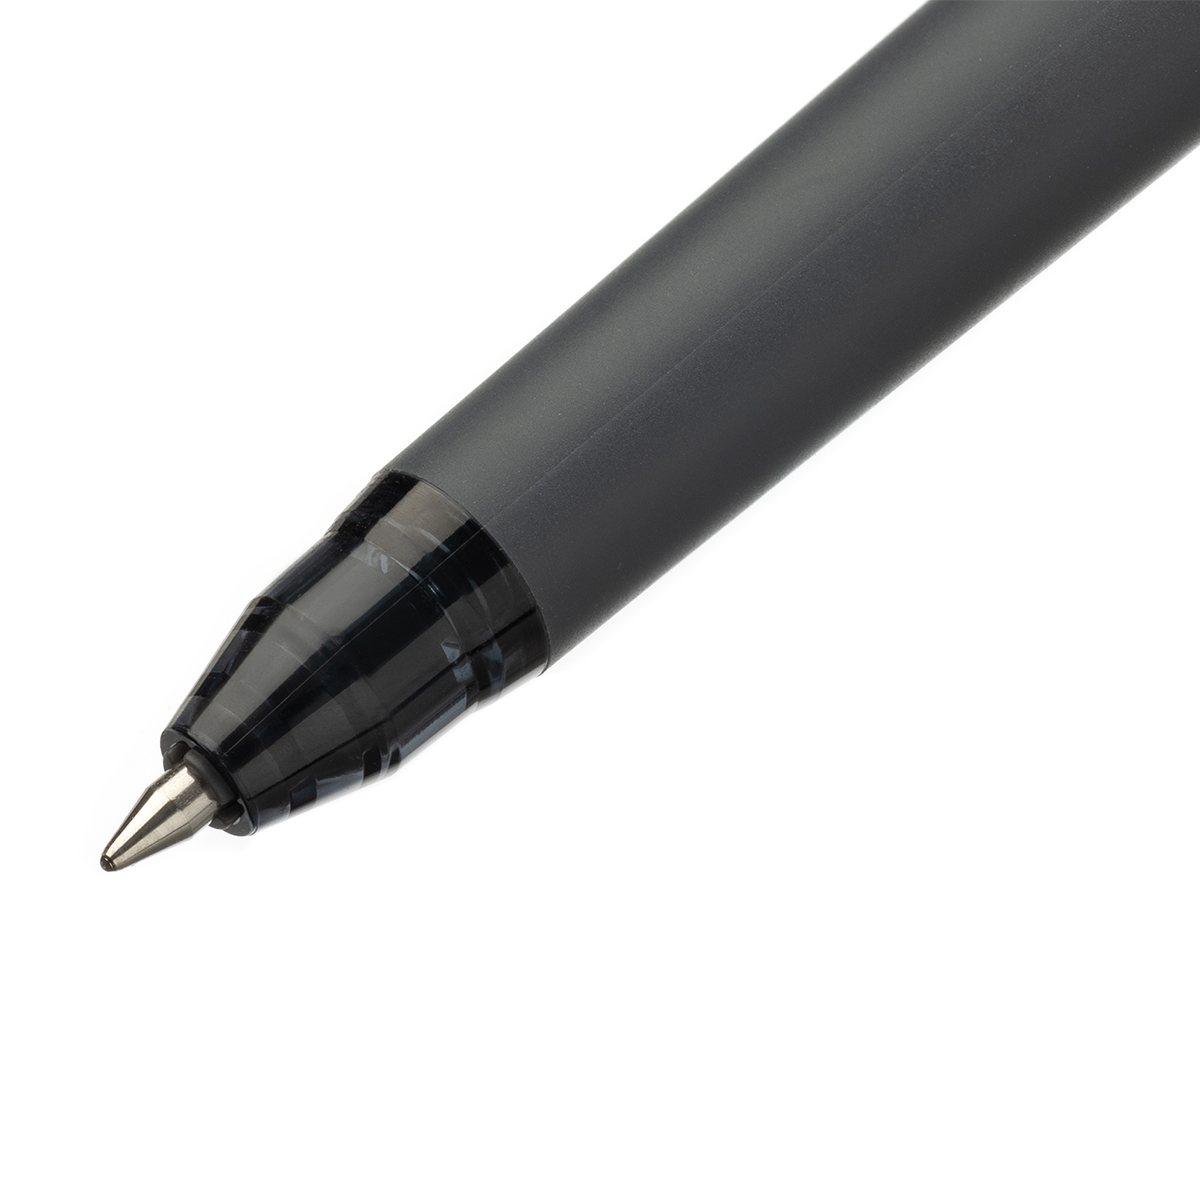 PILOT MONOxFrixion Gray and black simple series Black ink friction pen –  CHL-STORE